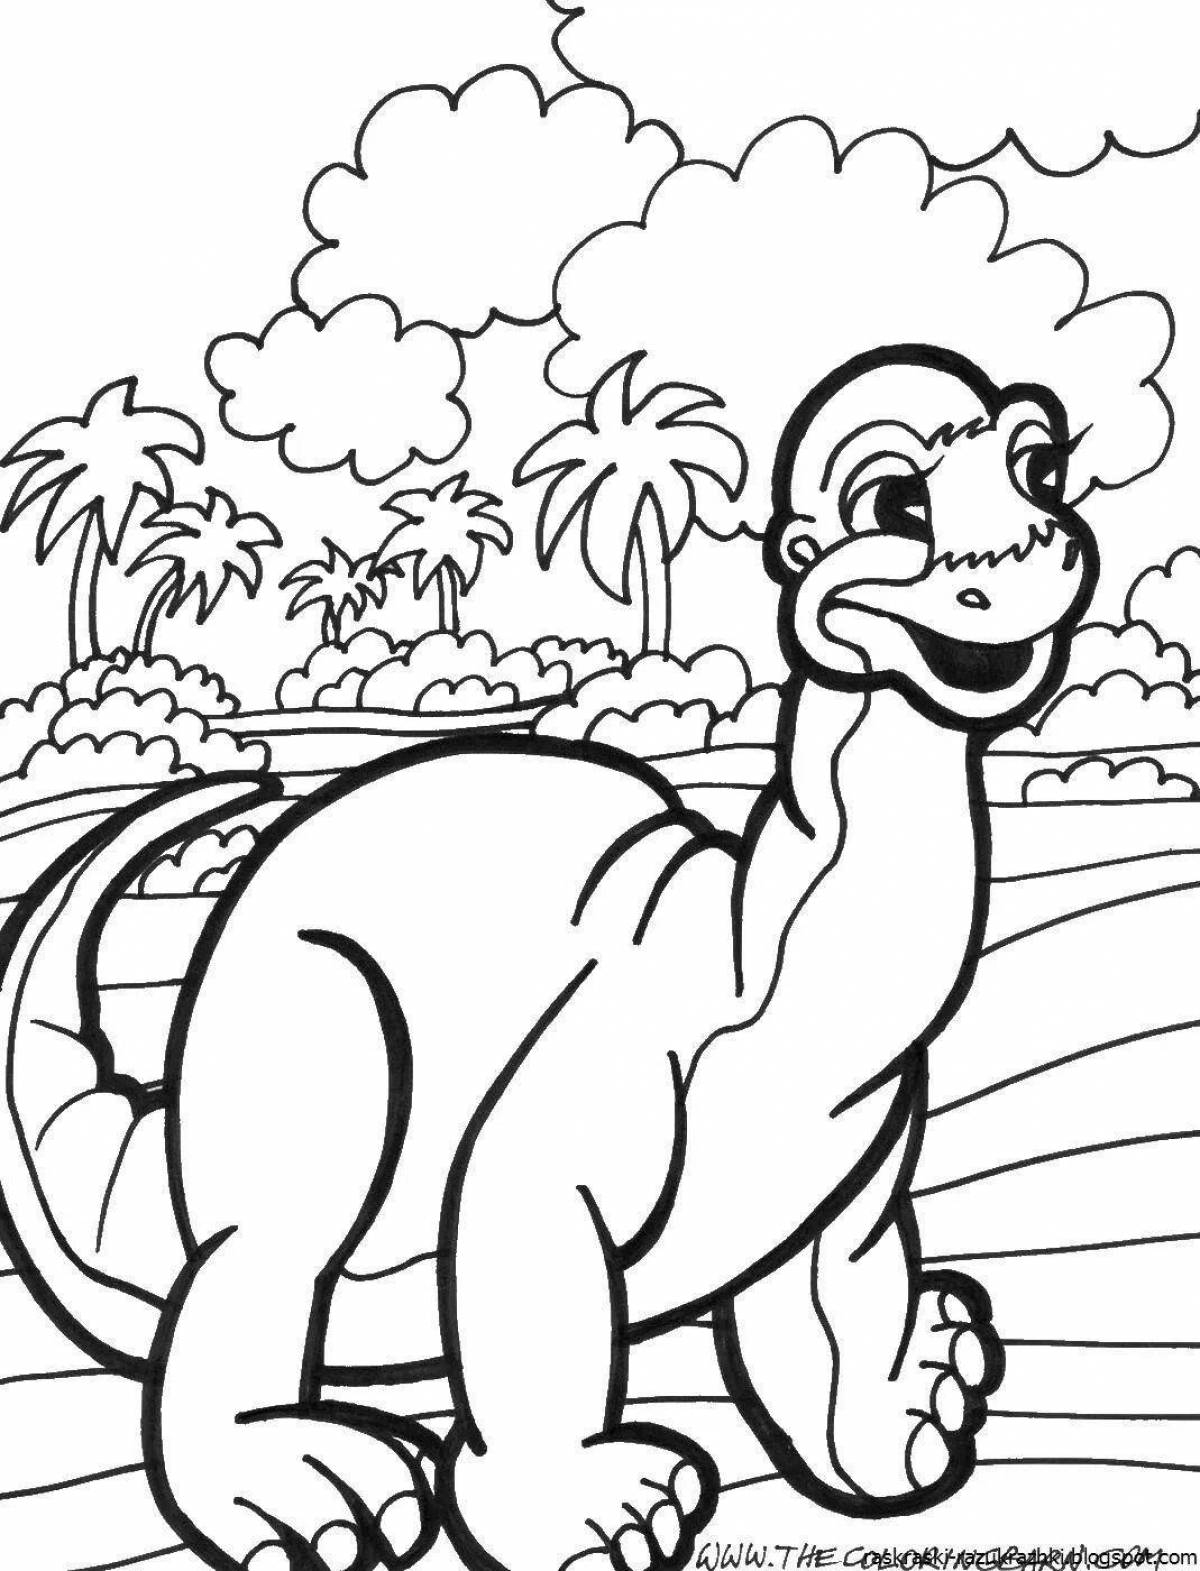 Sweet dinosaur coloring pages for kids